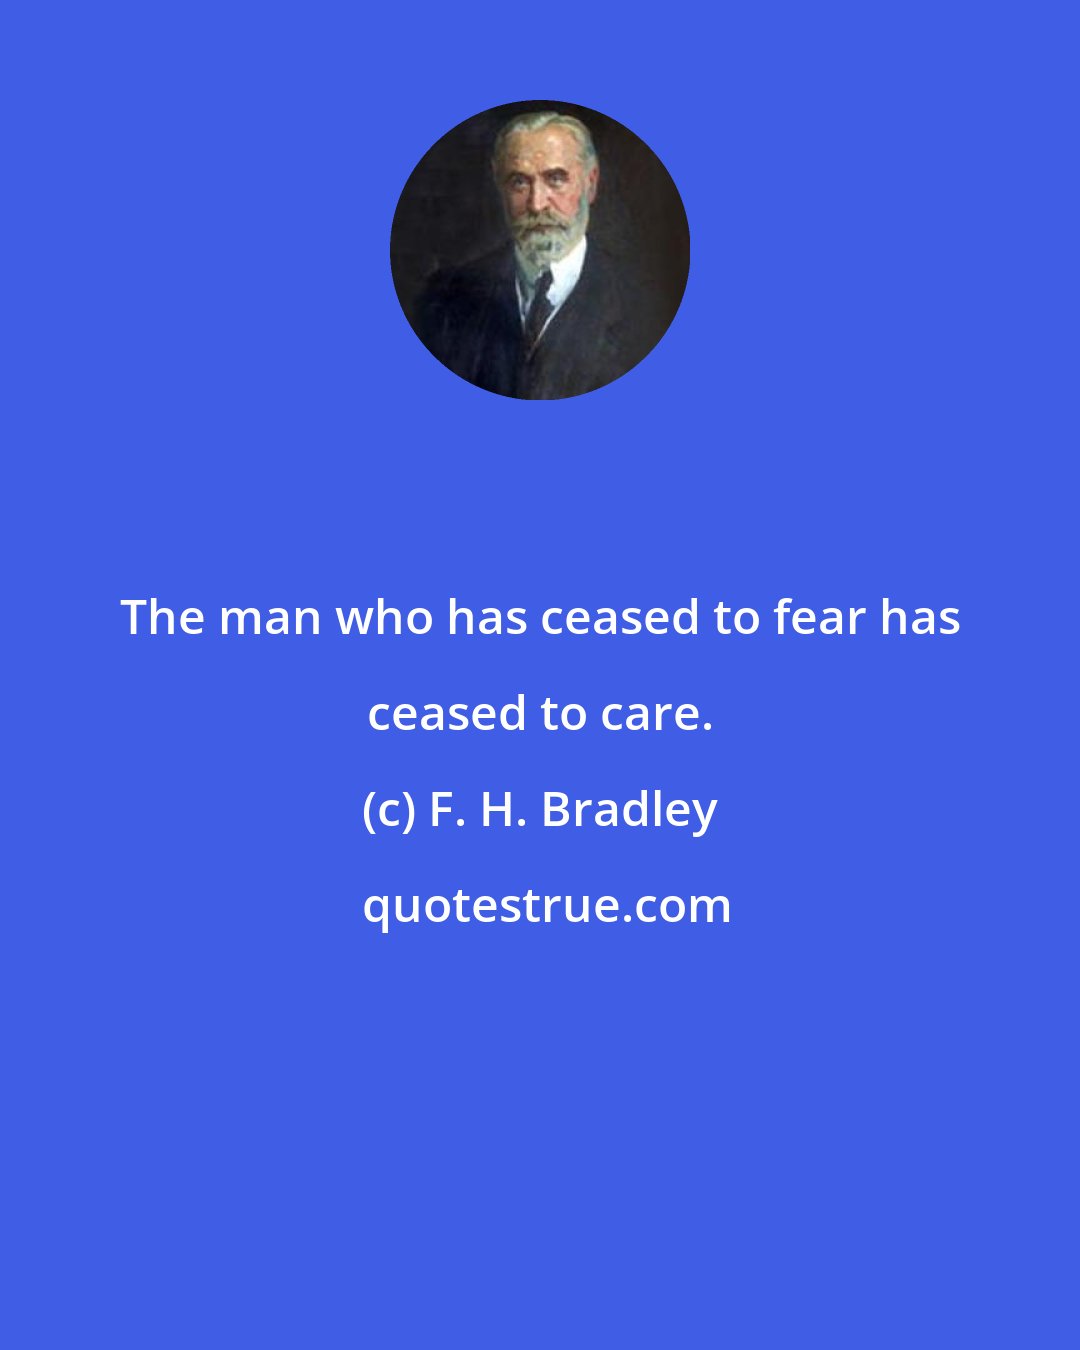 F. H. Bradley: The man who has ceased to fear has ceased to care.